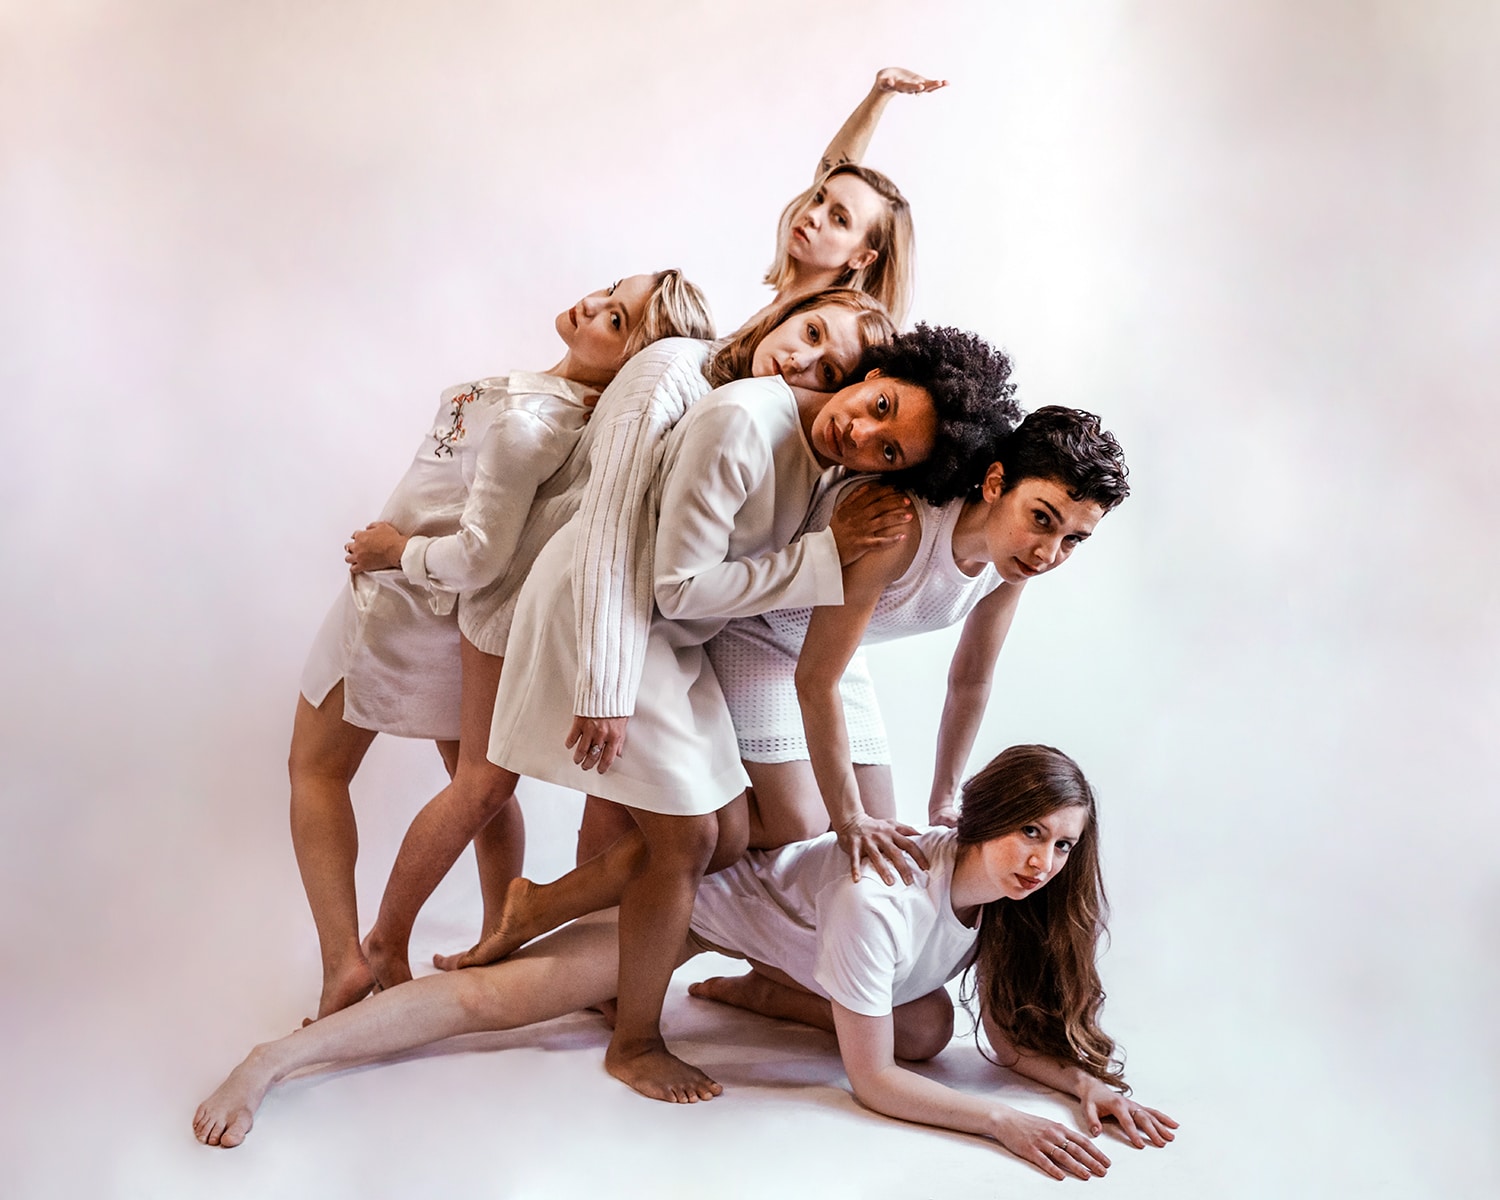 Turning in Place: The Women Choreographer Dance Film Festival